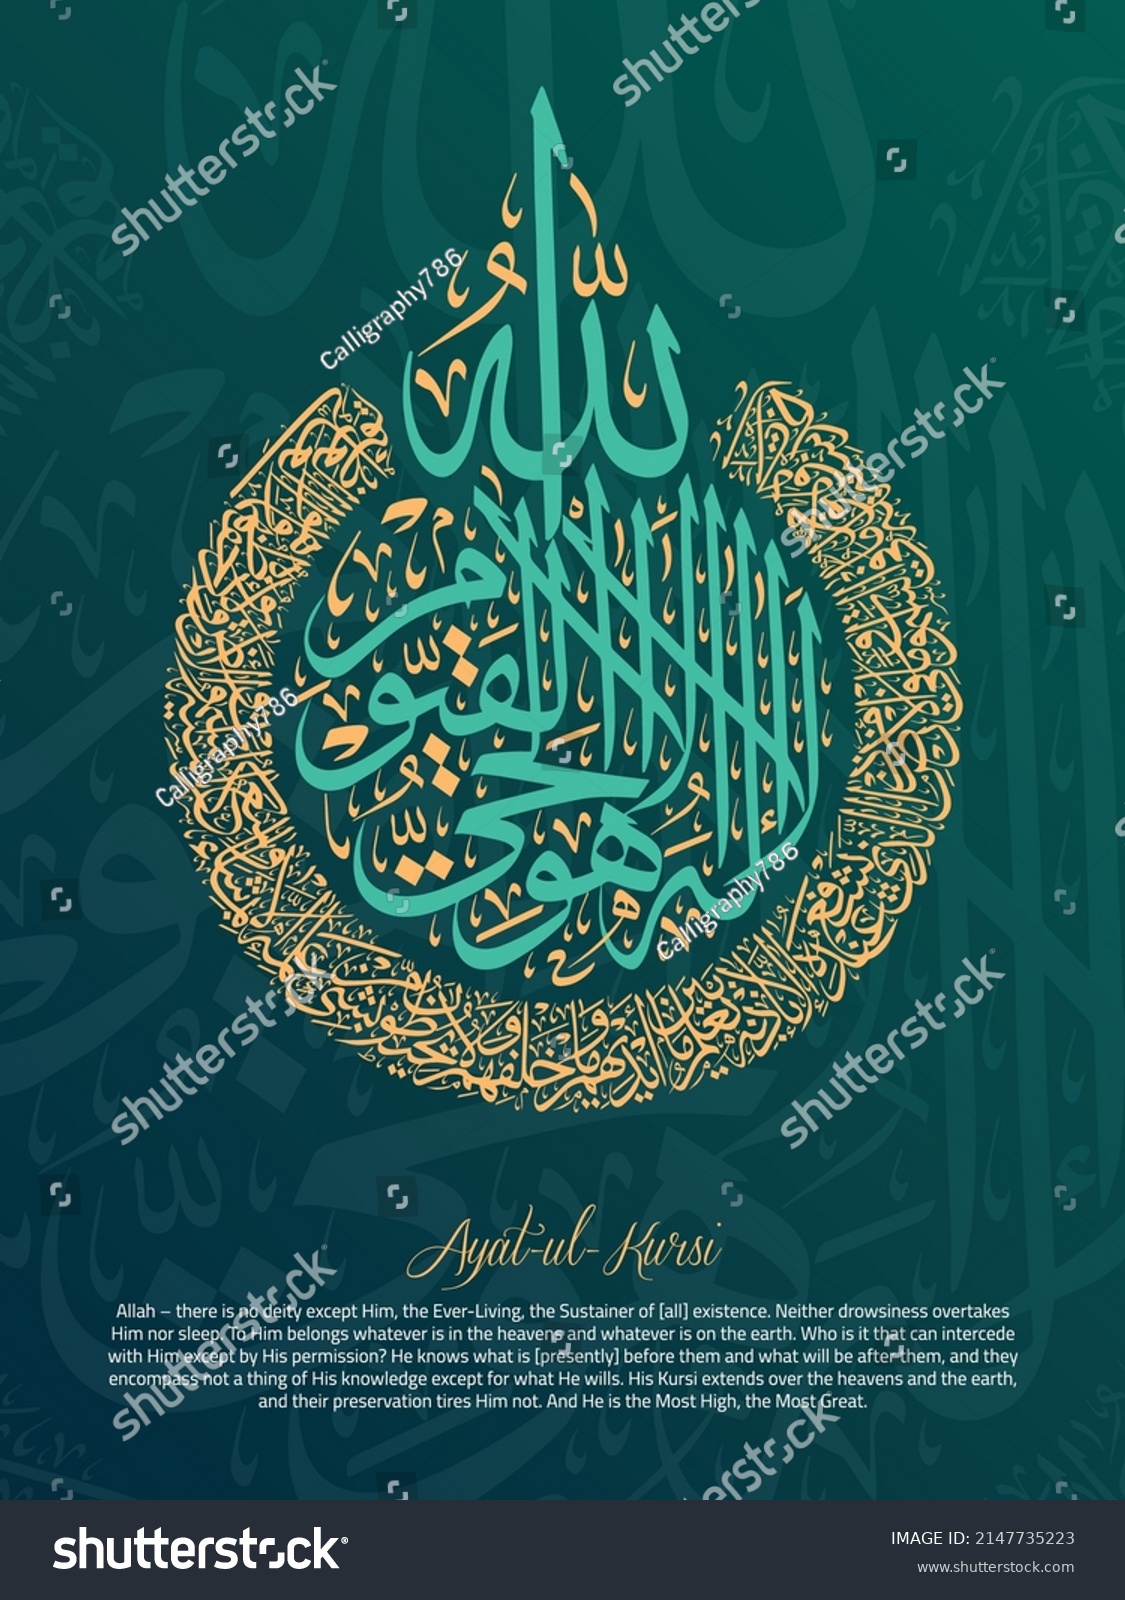 SVG of Composed Vector Calligraphy of Surah Al-Baqarah (verse number 255) - AYAT UL KURSI, with English Translation; Allah – there is no deity except Him, the Ever-Living, the Sustainer of [all] existence... svg